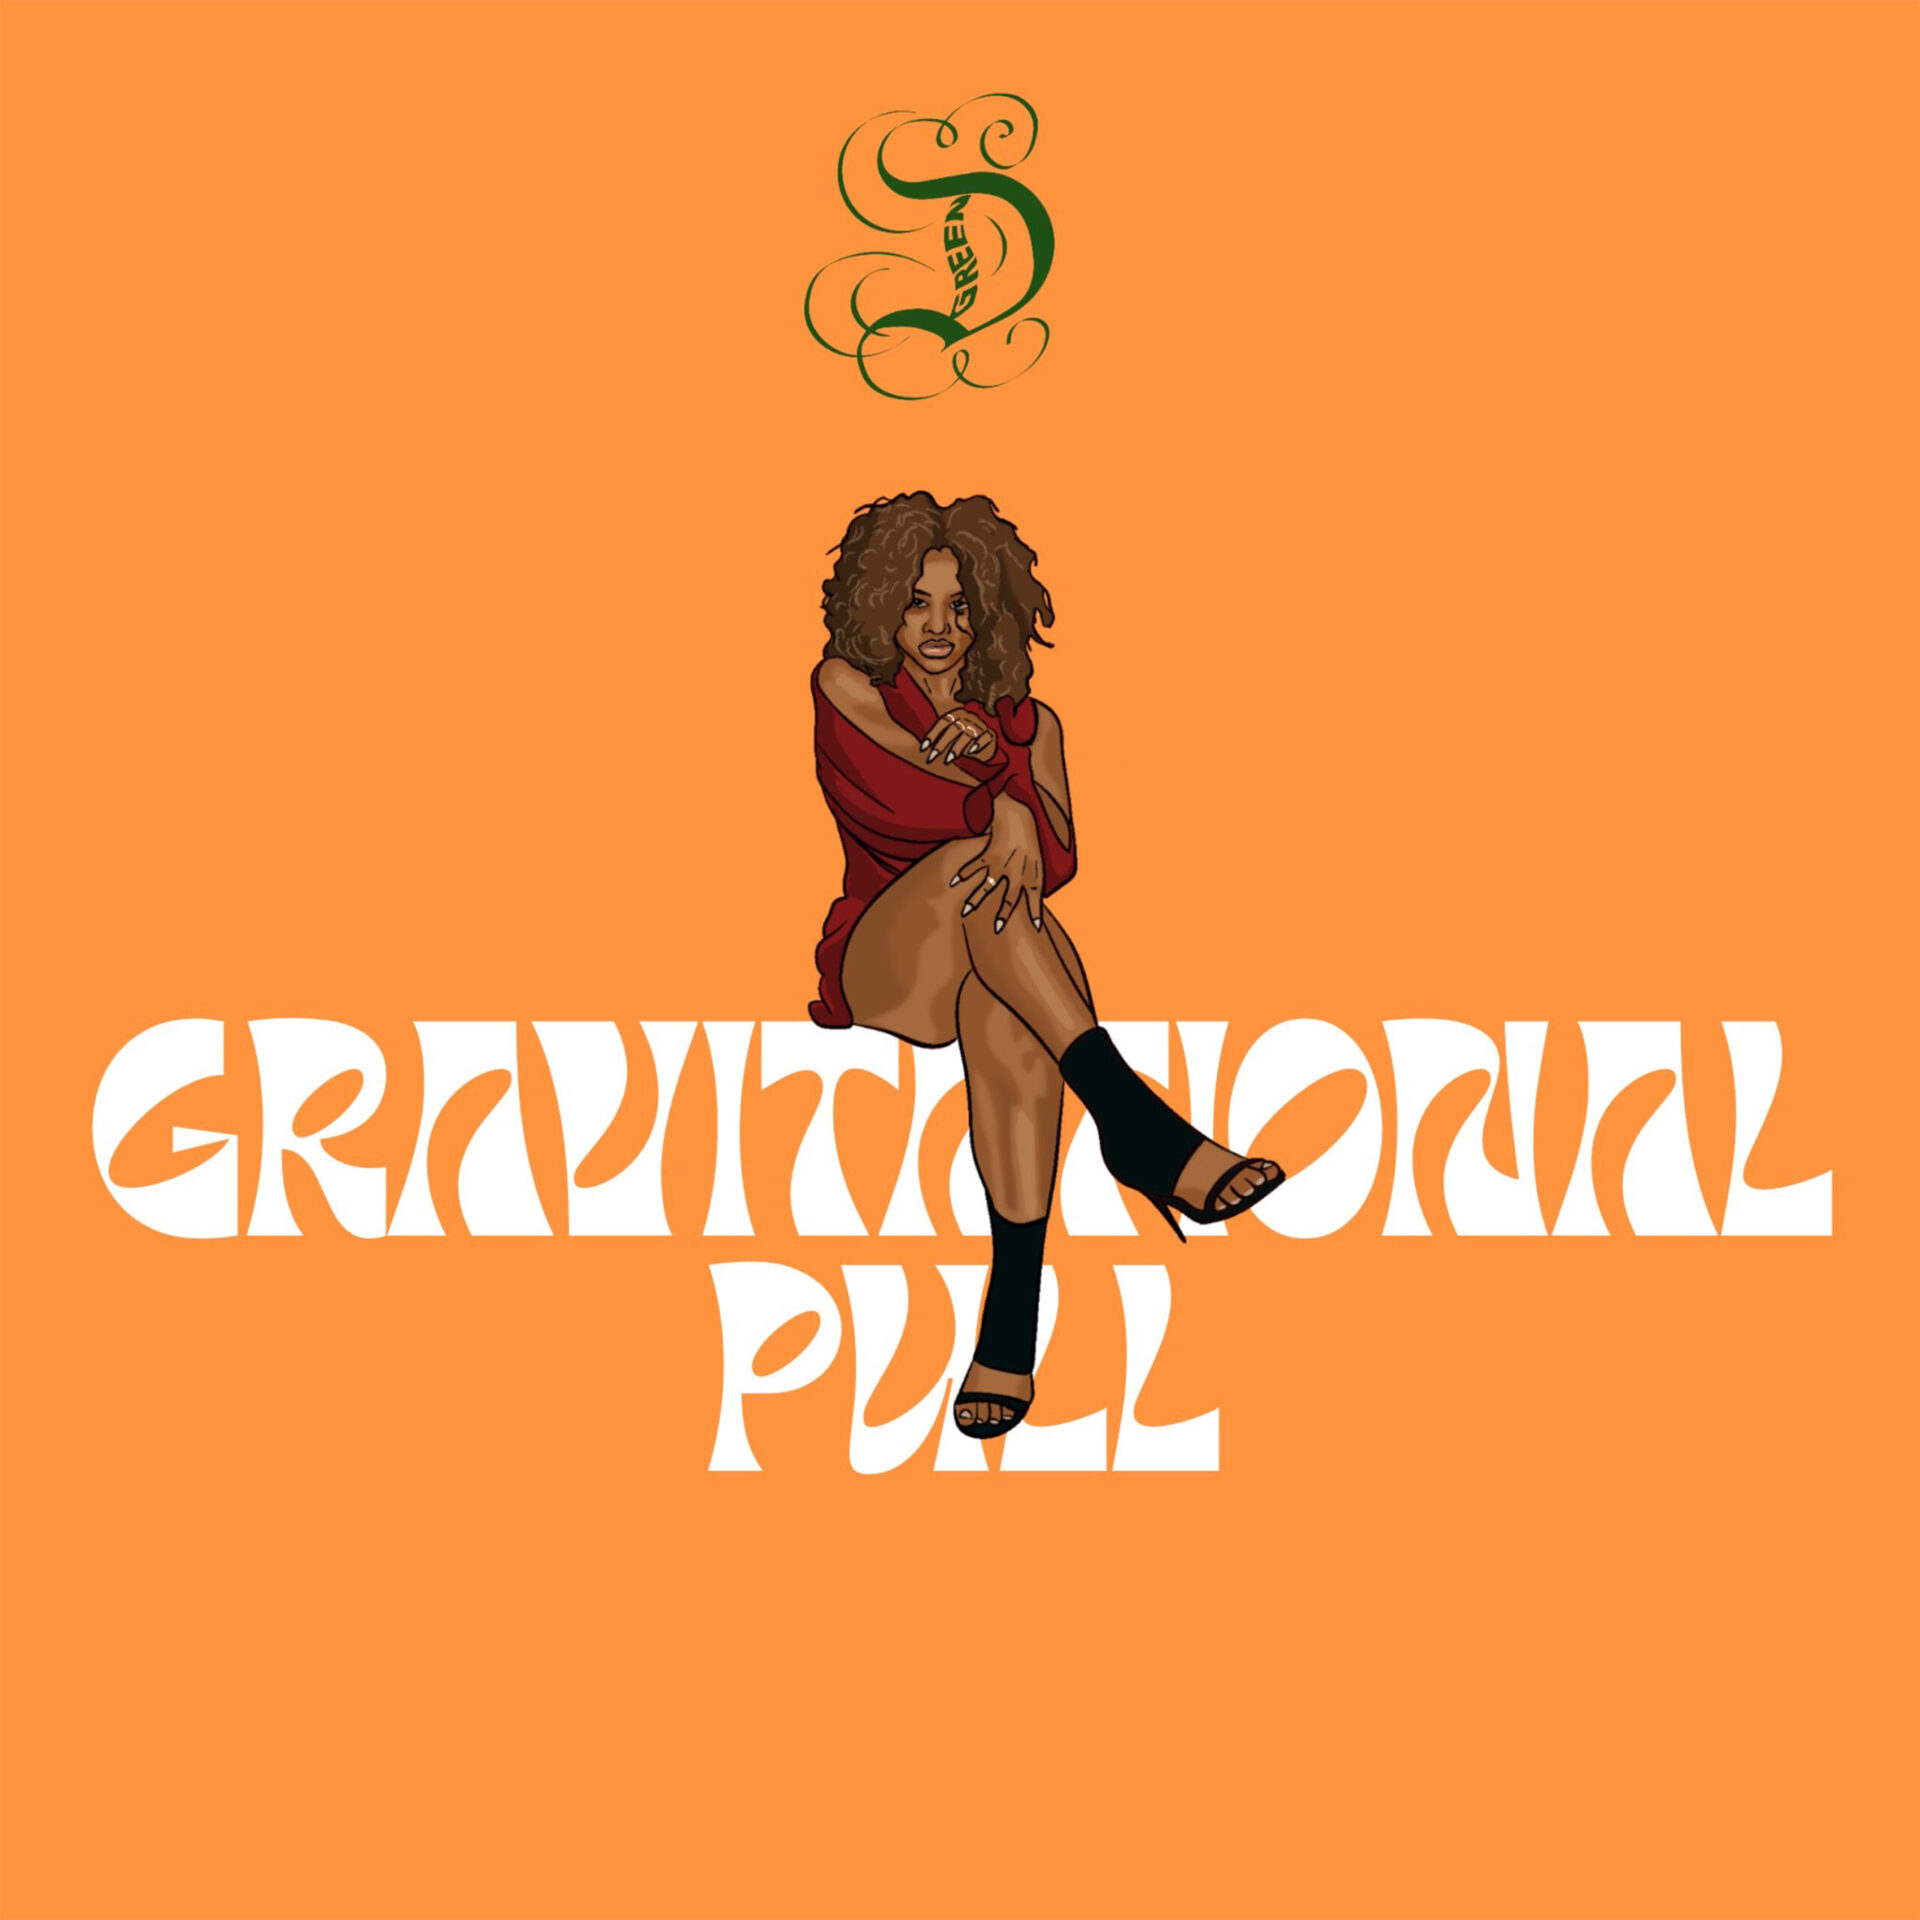 Gravitational Pull by D. Green art cover